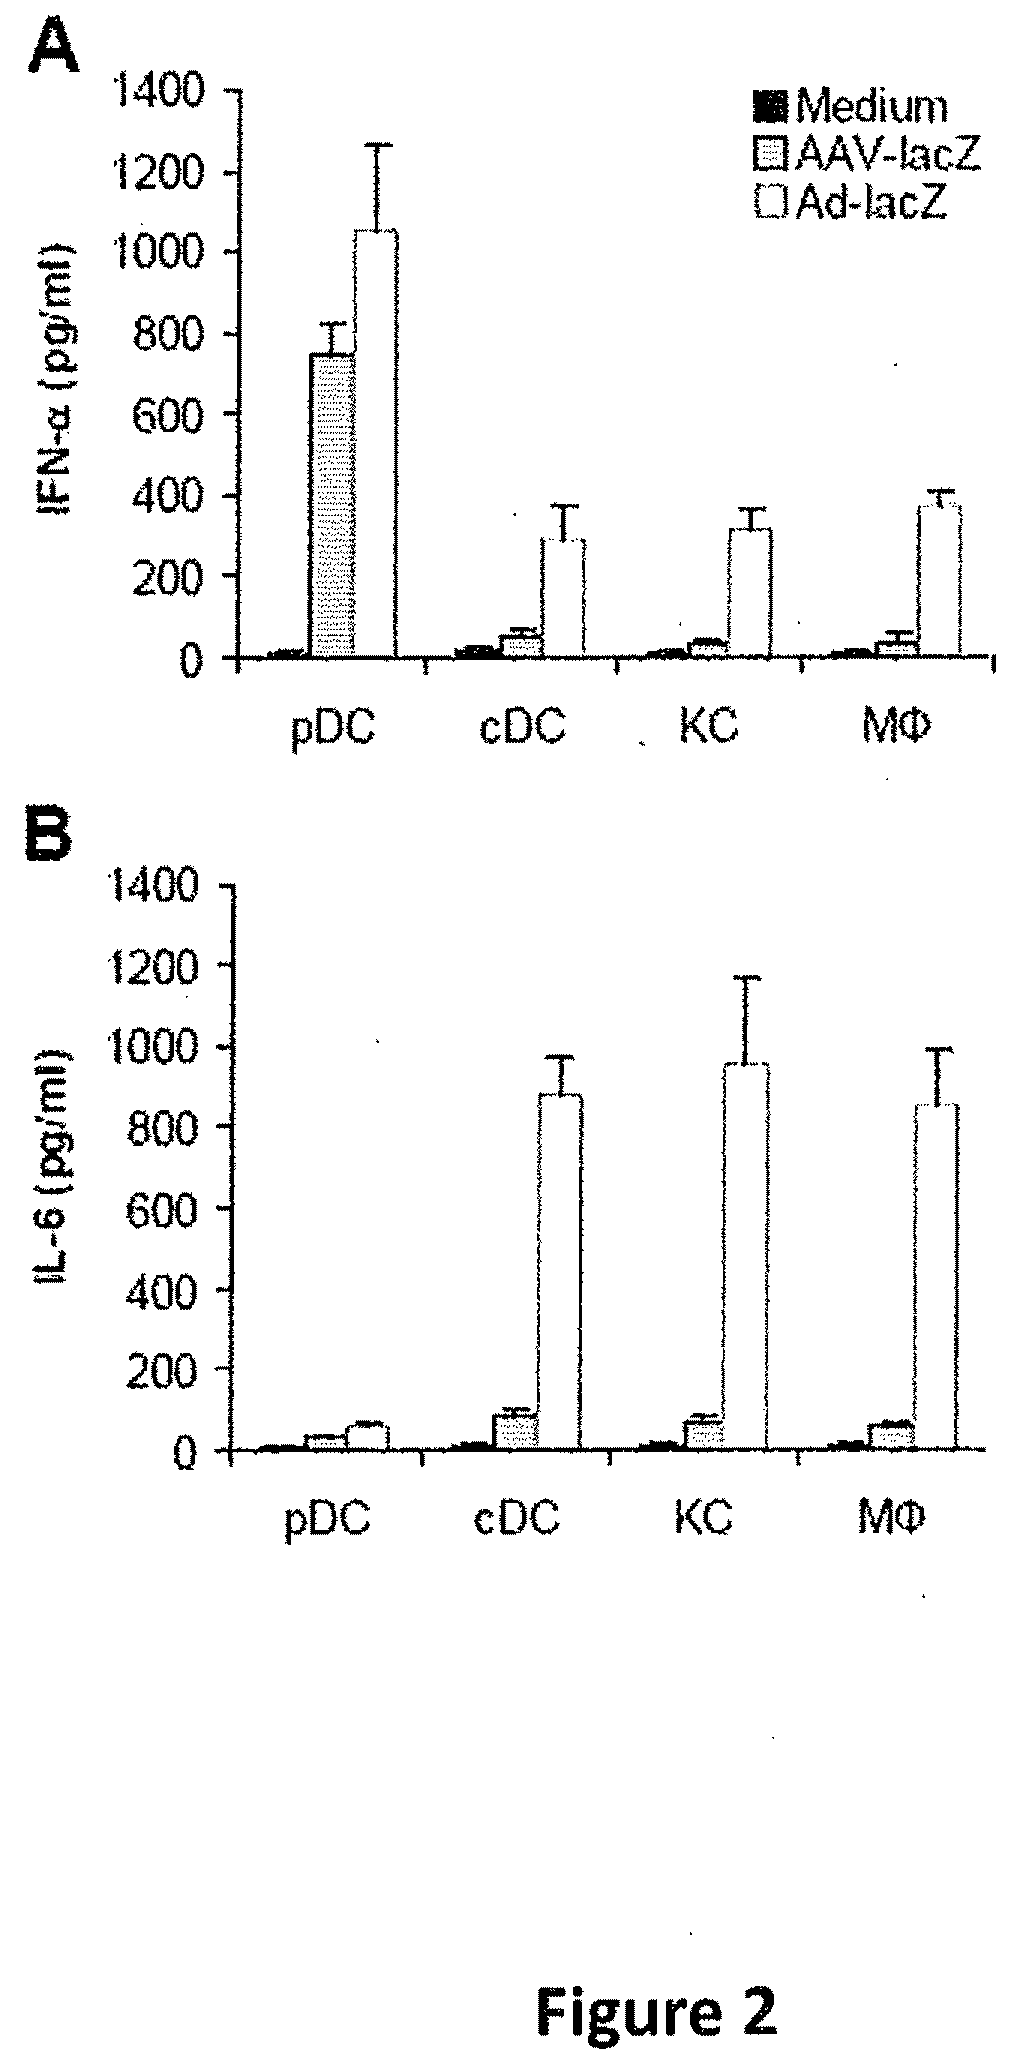 Methods for modulating immune responses to aav gene therapy vectors